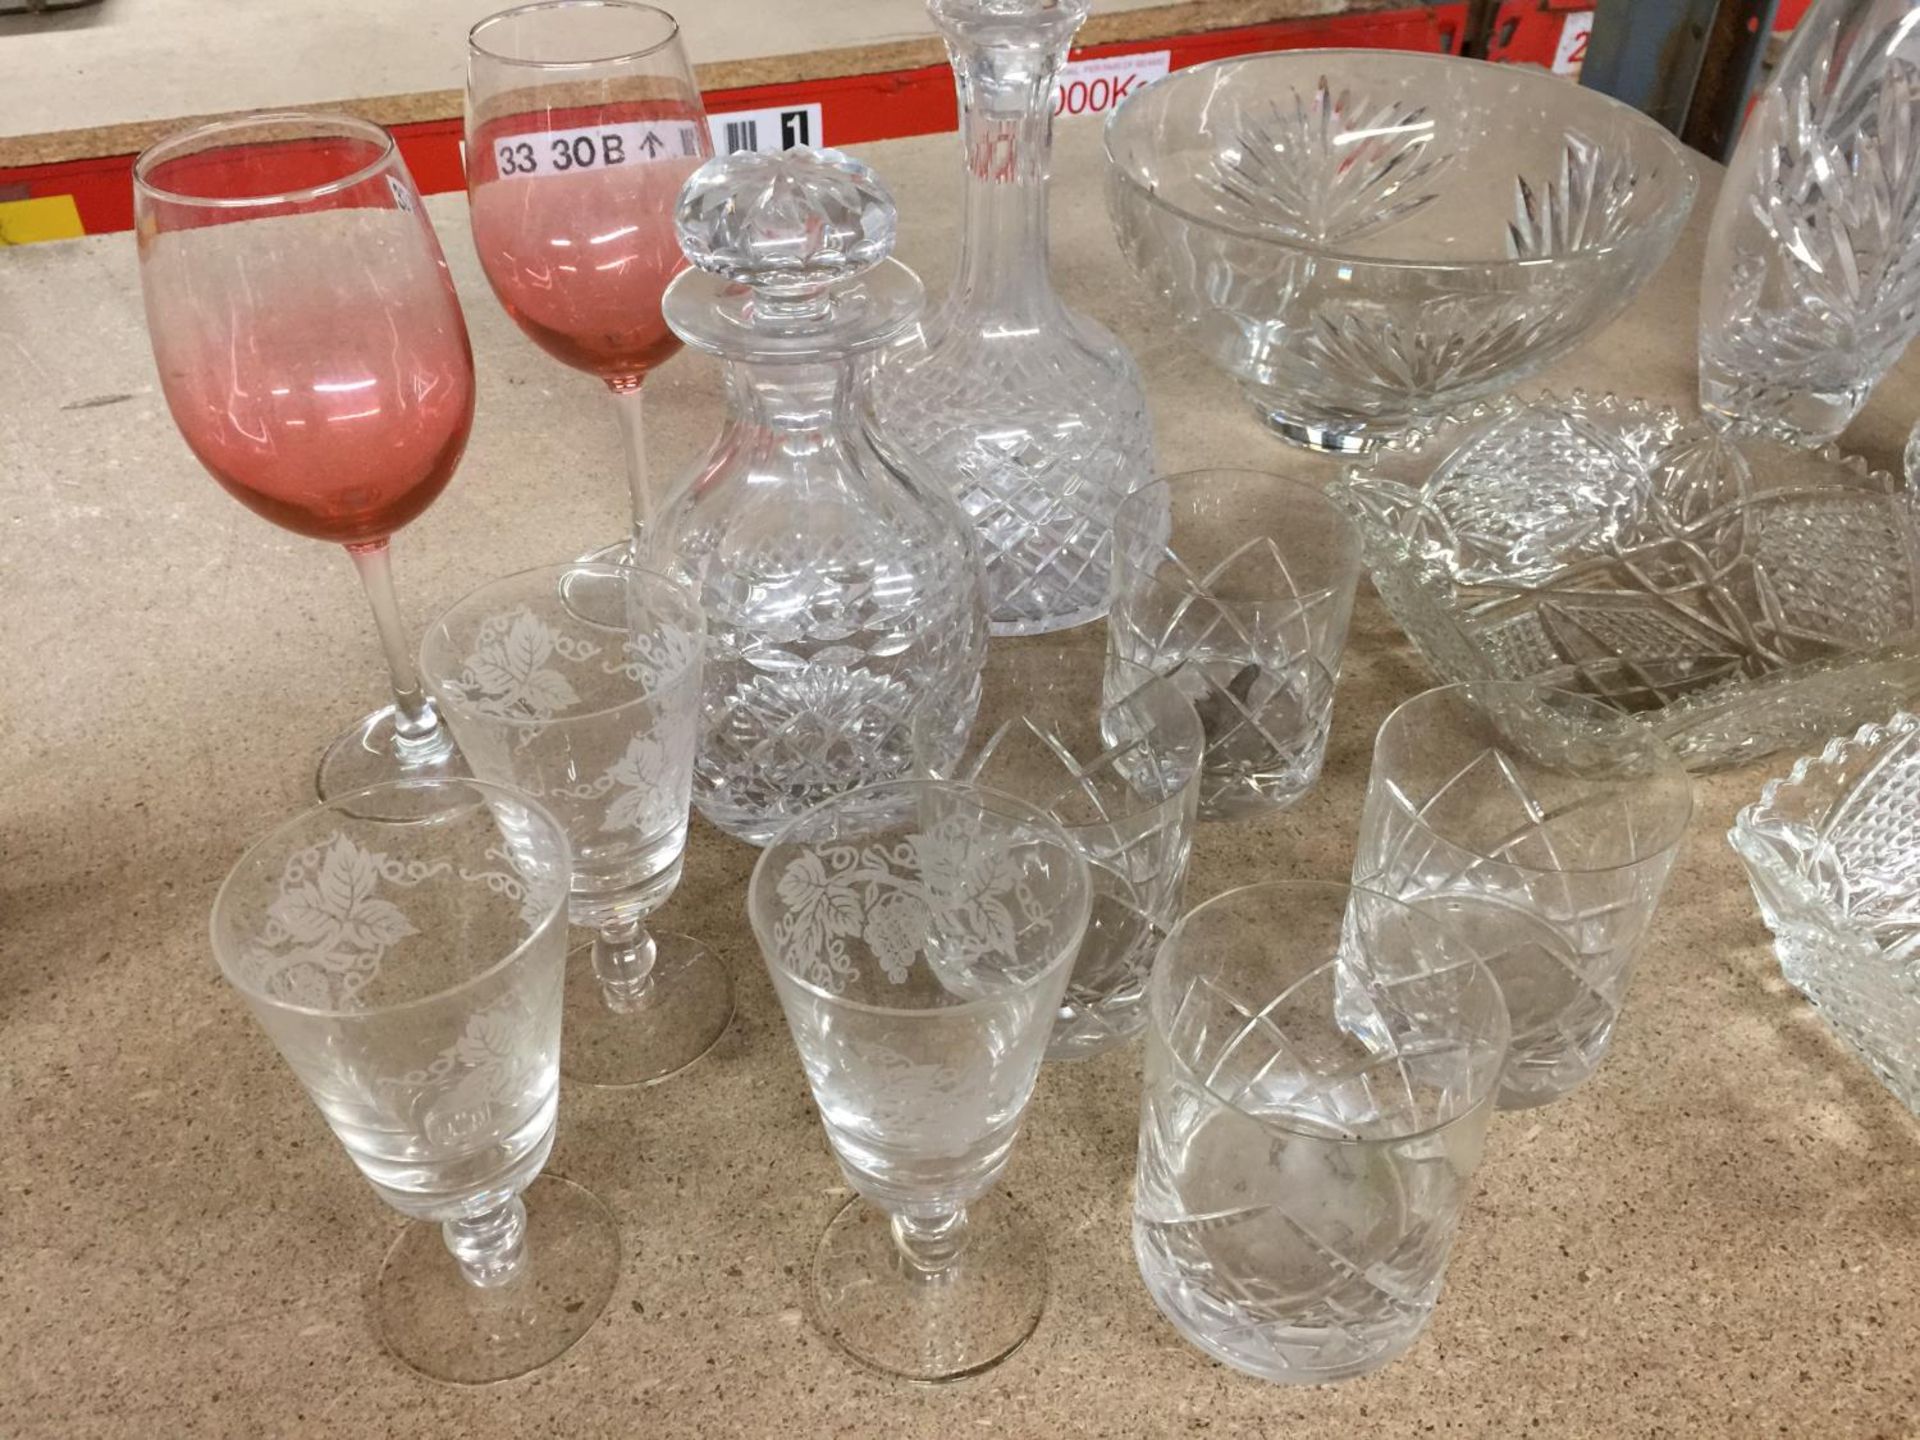 AN ASSORTMENT OF GLASSWARE TO INCLUDE DECANTERS, BOWLS, VASES, GLASSES, ETC - Image 2 of 7